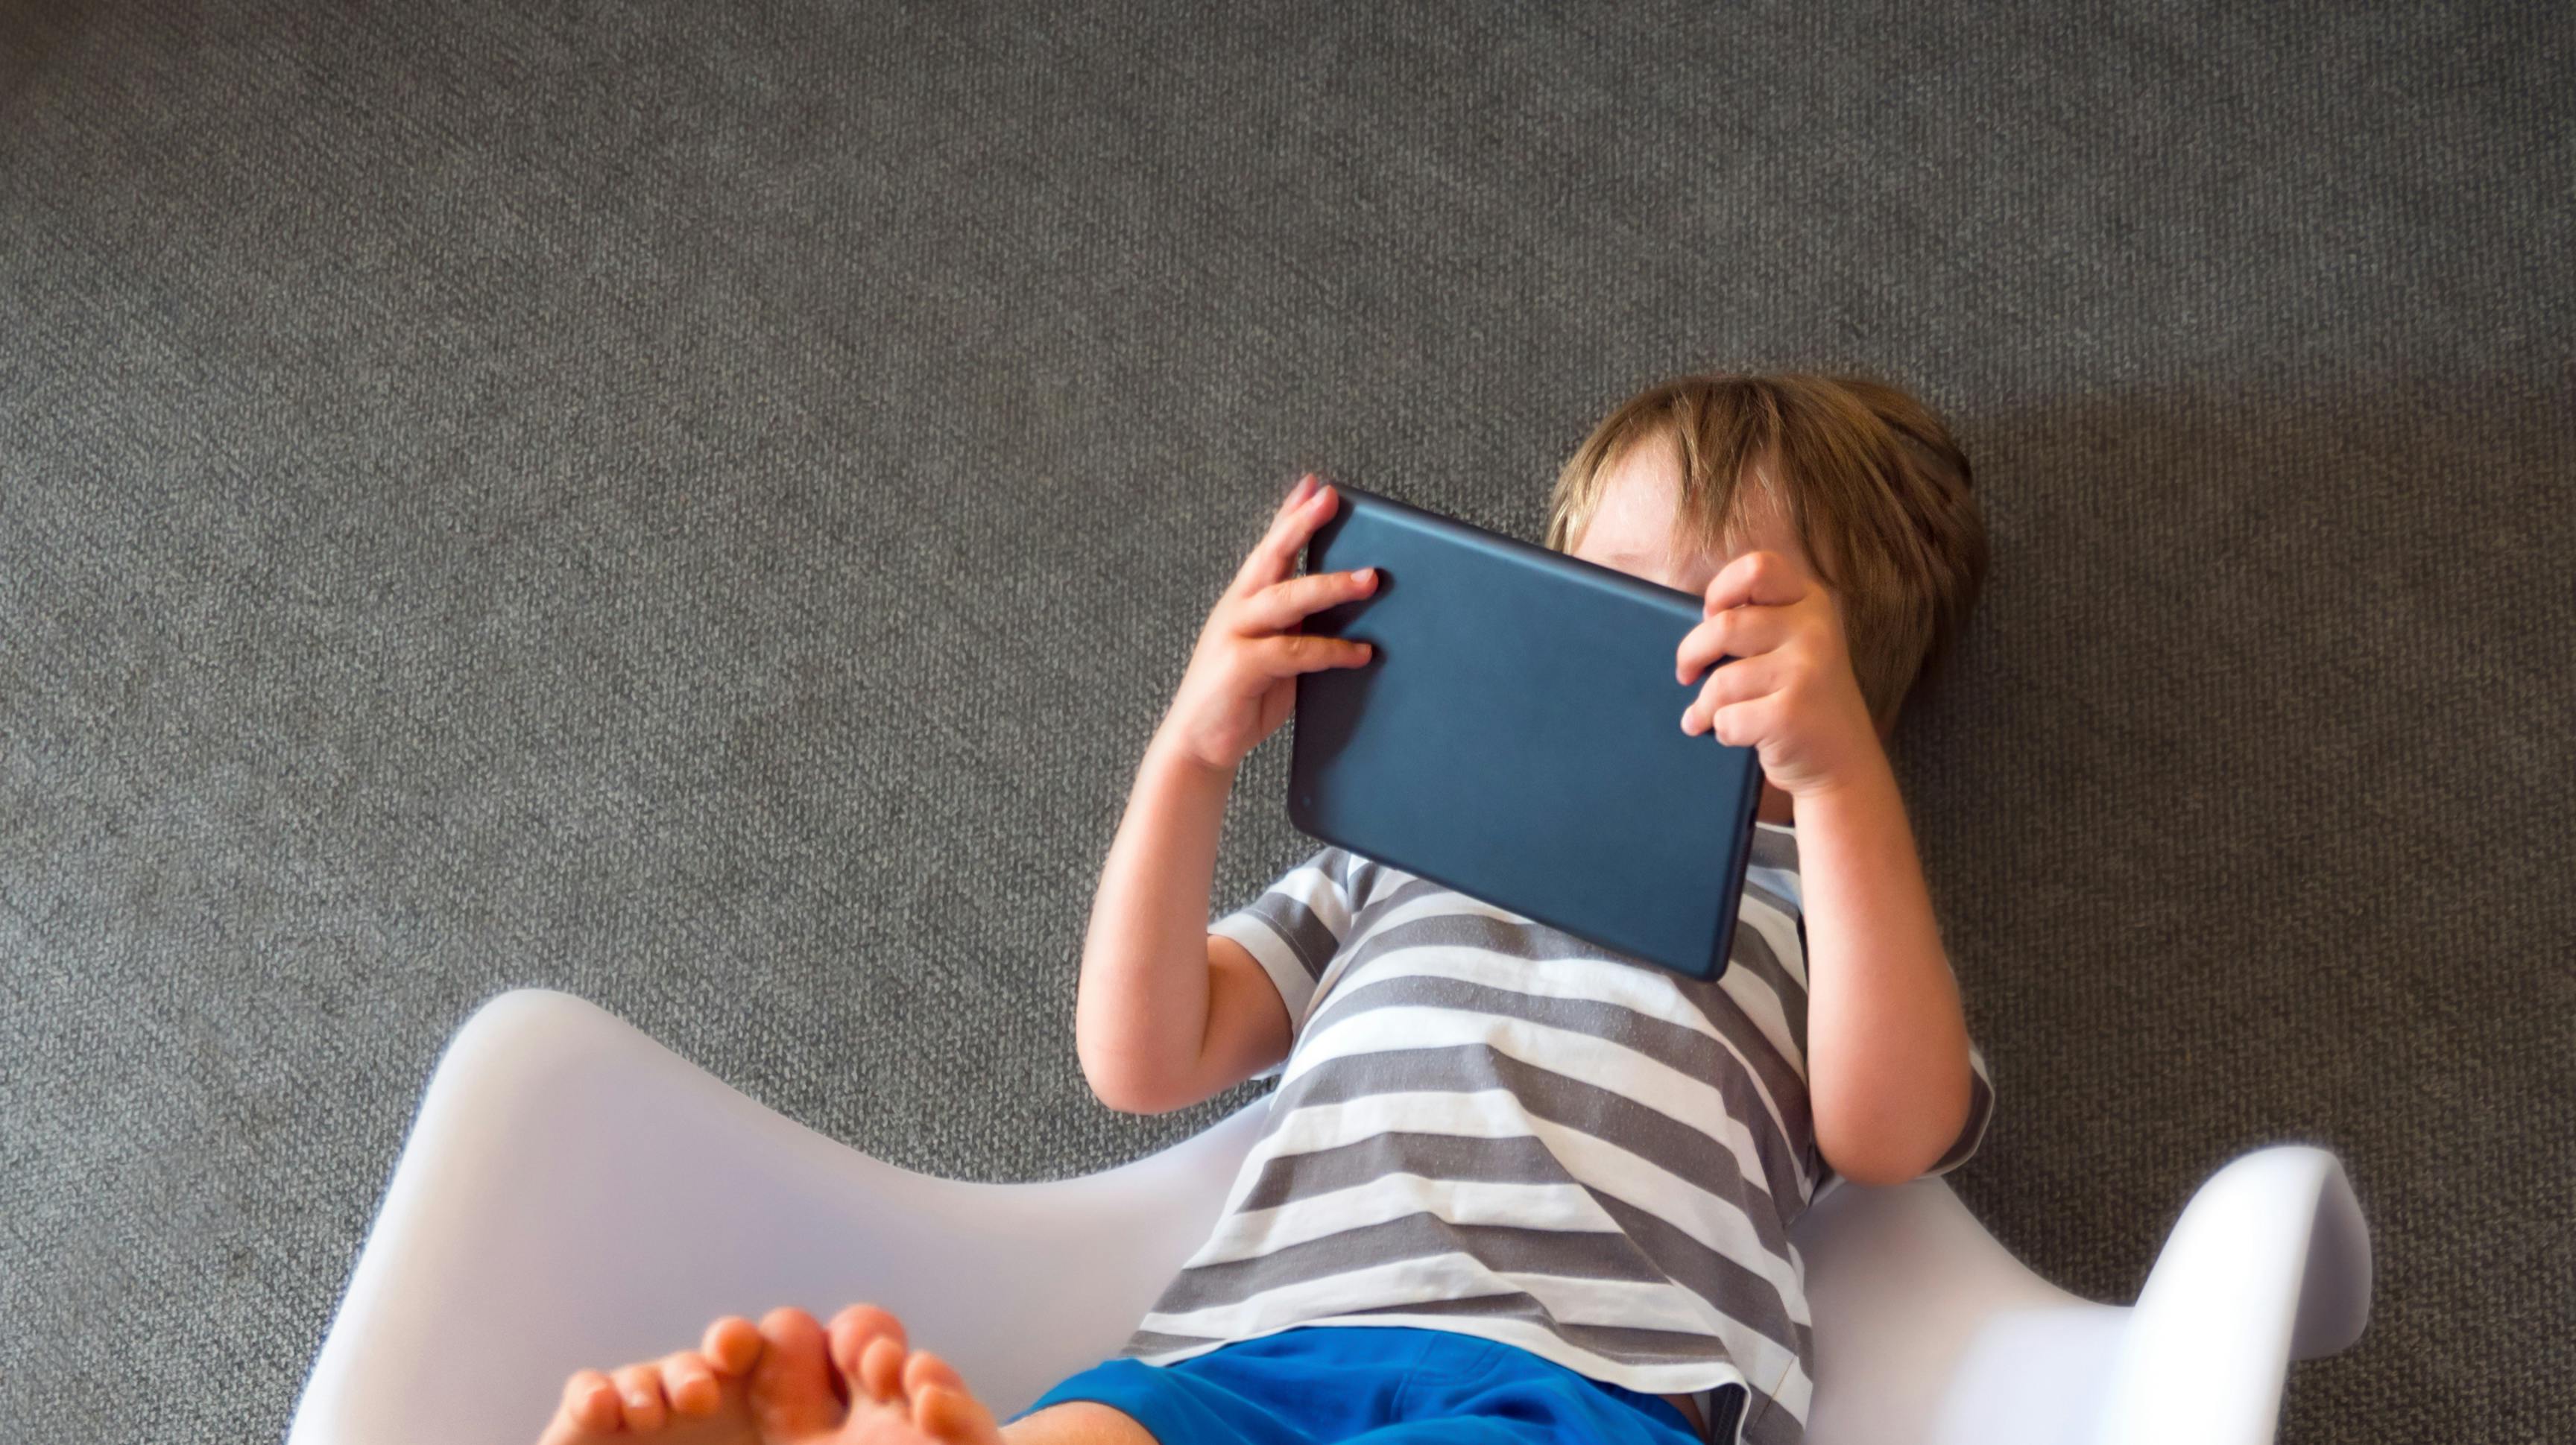 Boy with ipad. Children and gadgets. Kid with tablet. Alternative education concept. Social communication disorder. Digital future. Preschooler with wireless gadget. Alternative education